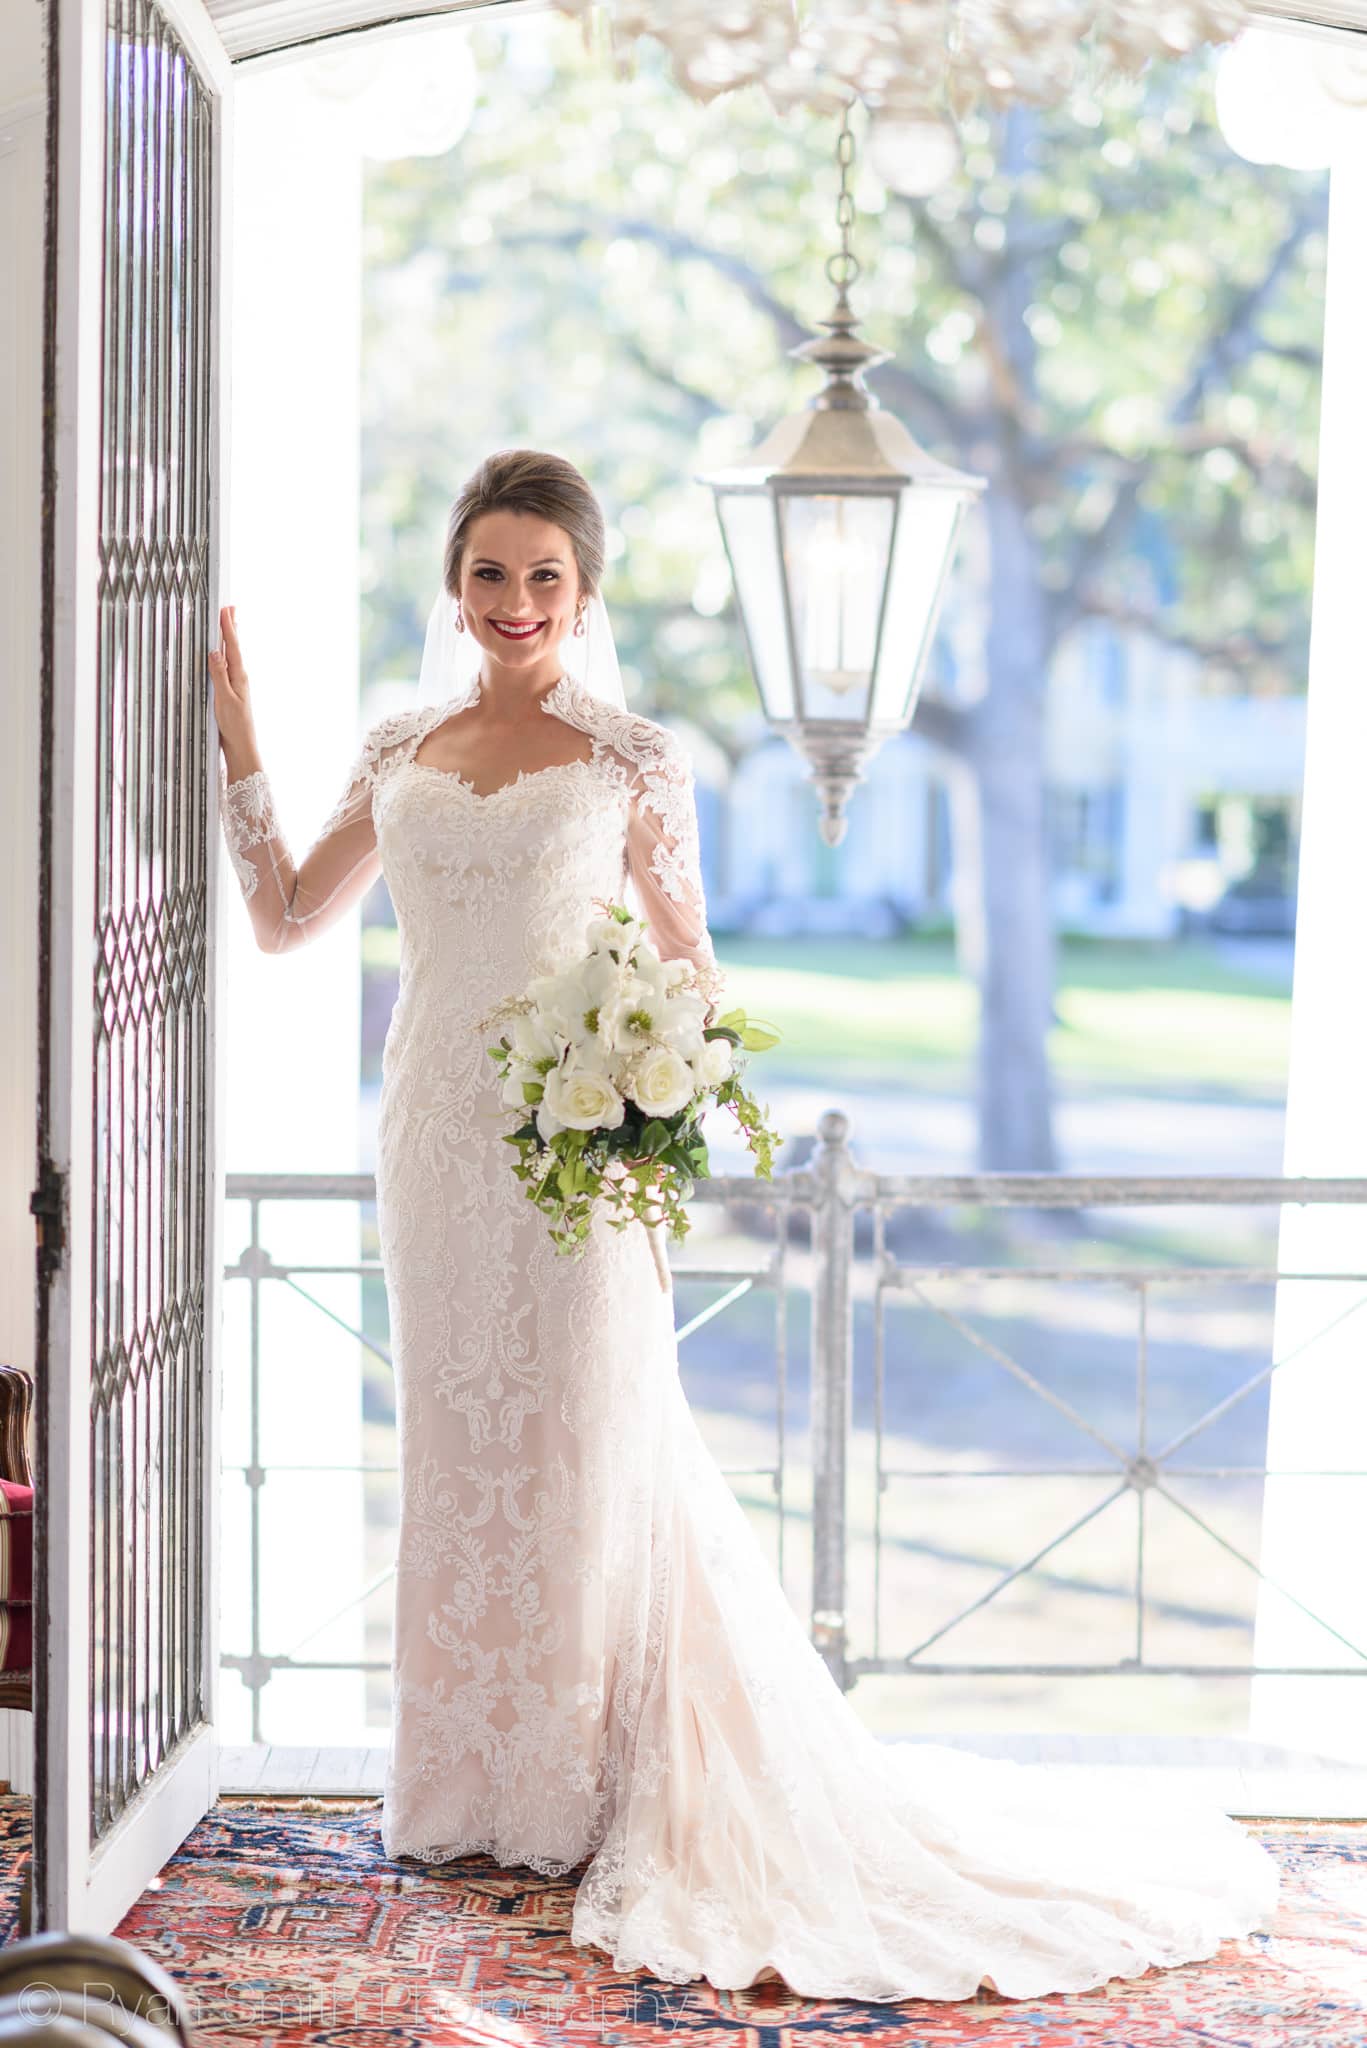 Bride leaning against balcony door - Rosewood Manor - Marion - Rosewood Manor, Marion